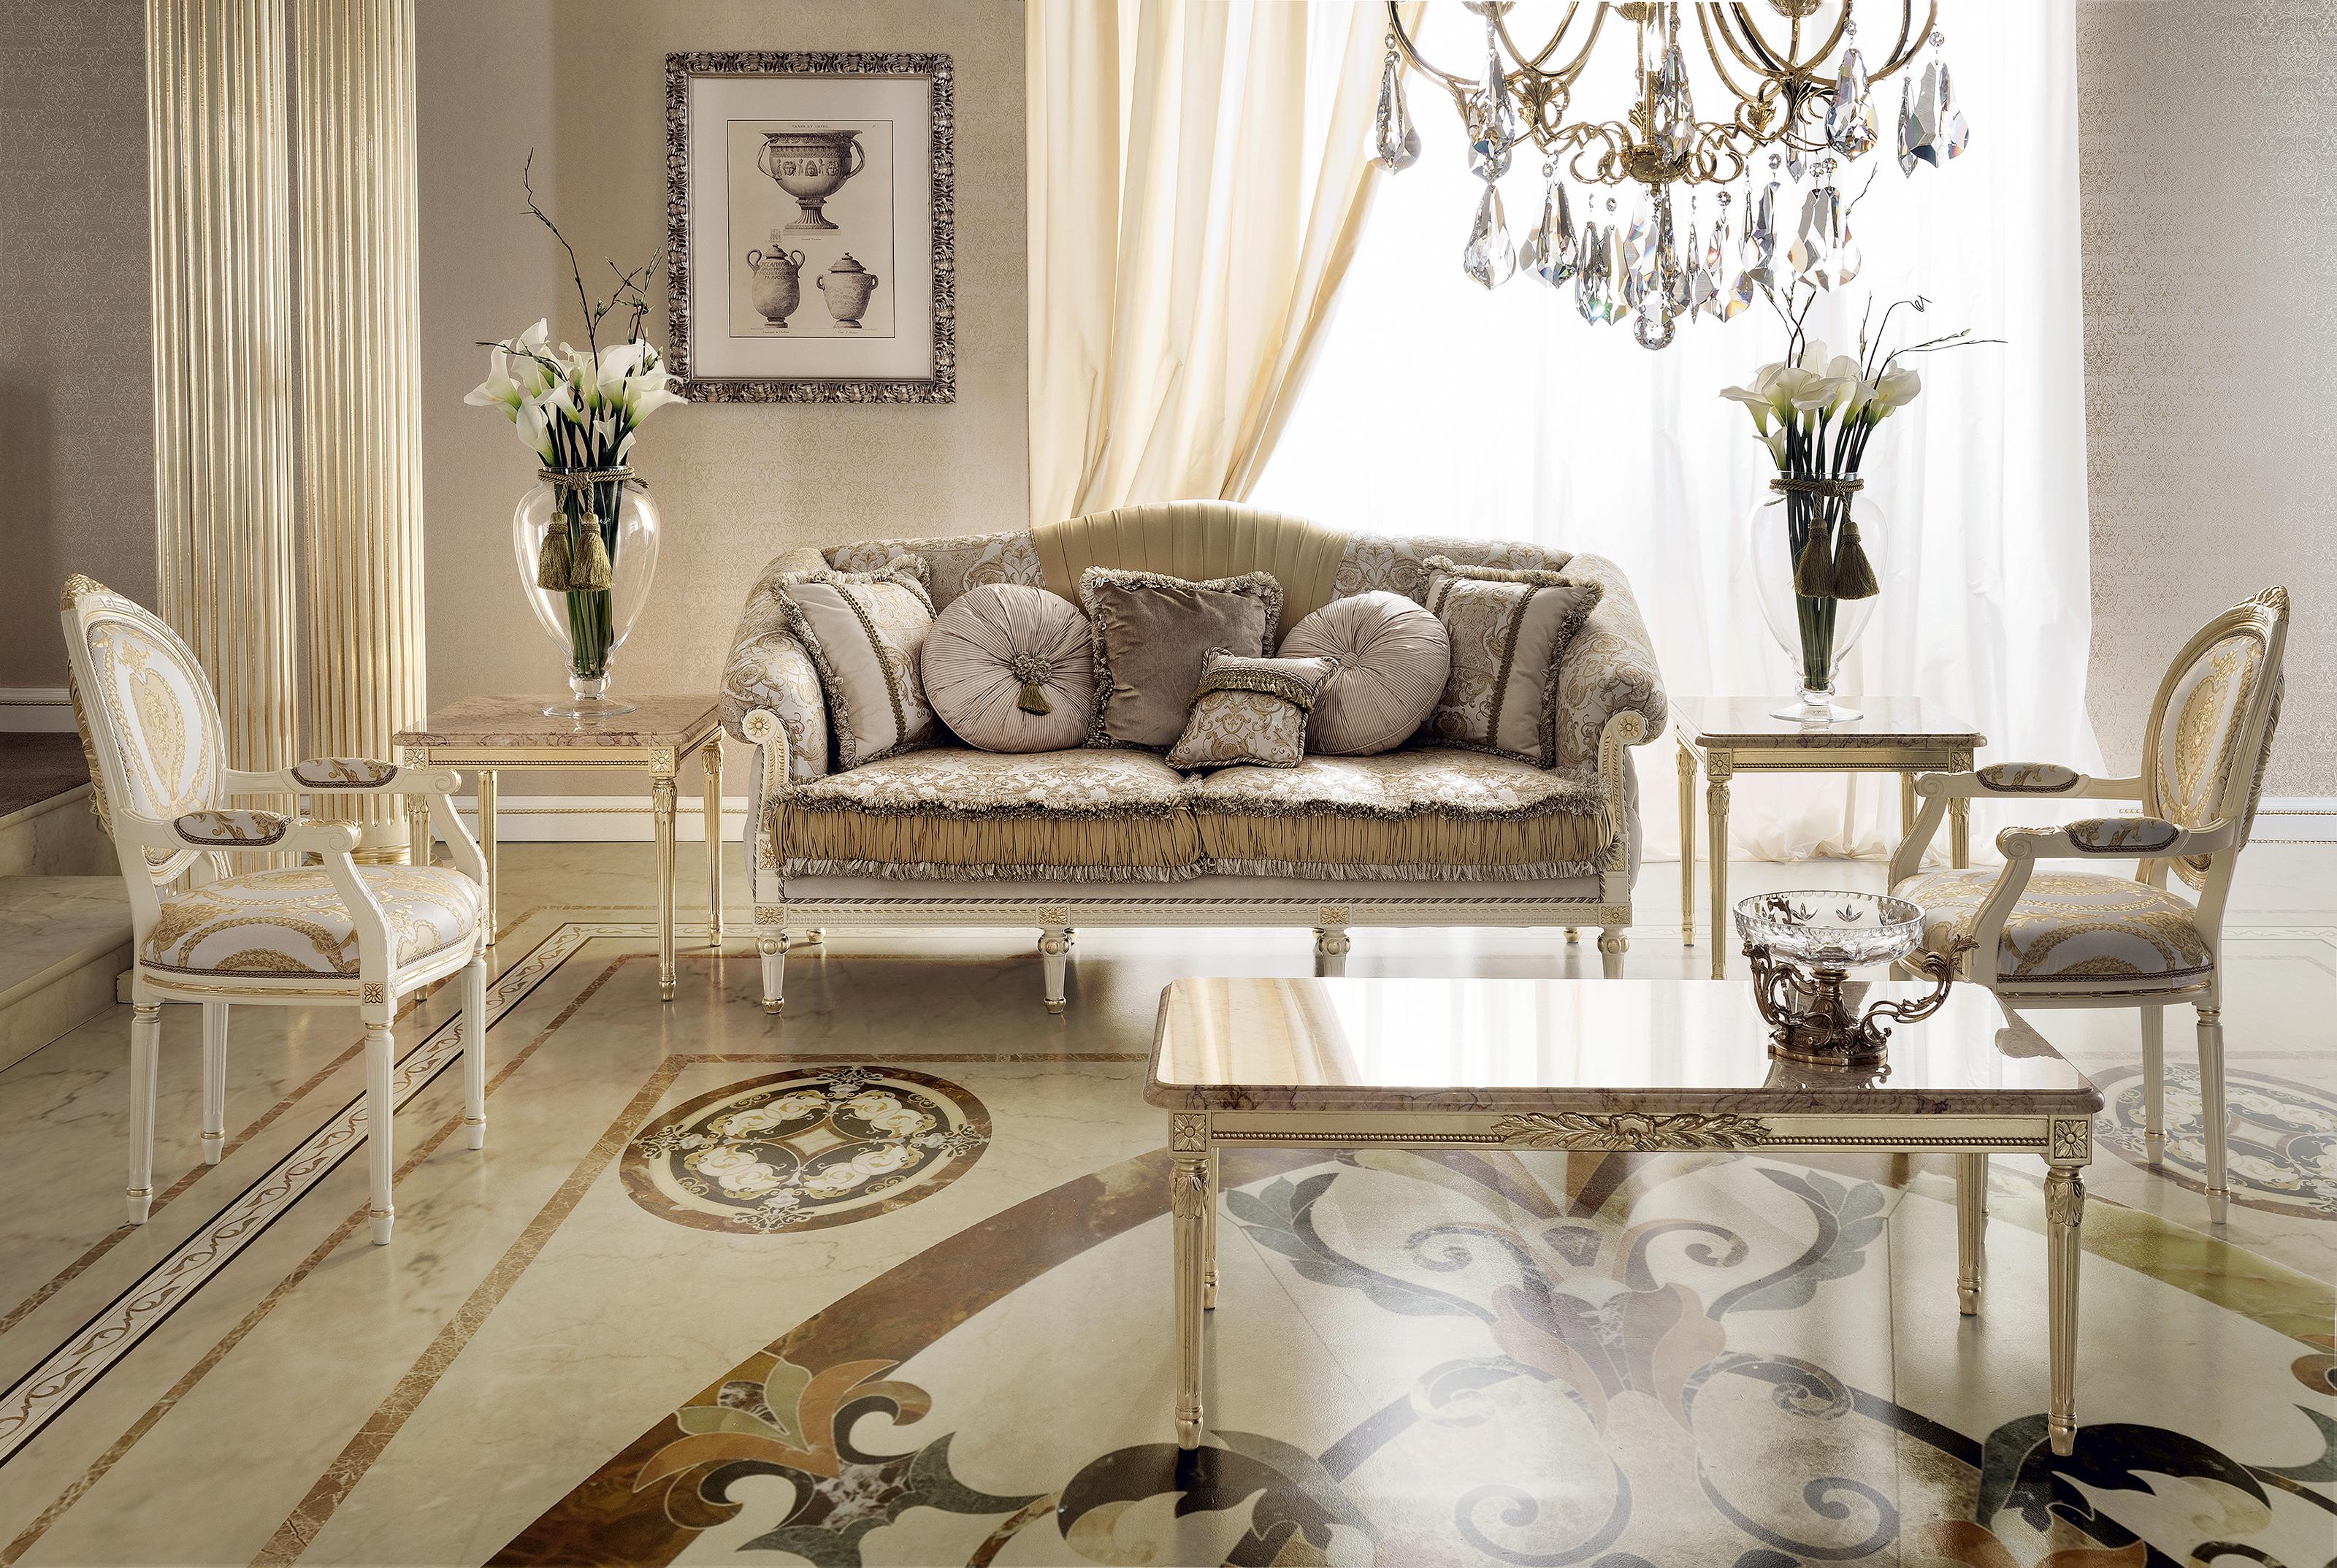 Italian Golden Satin Duchess Sofa in Ivory Laquered Wood and Velvety Cream Capitonné For Sale